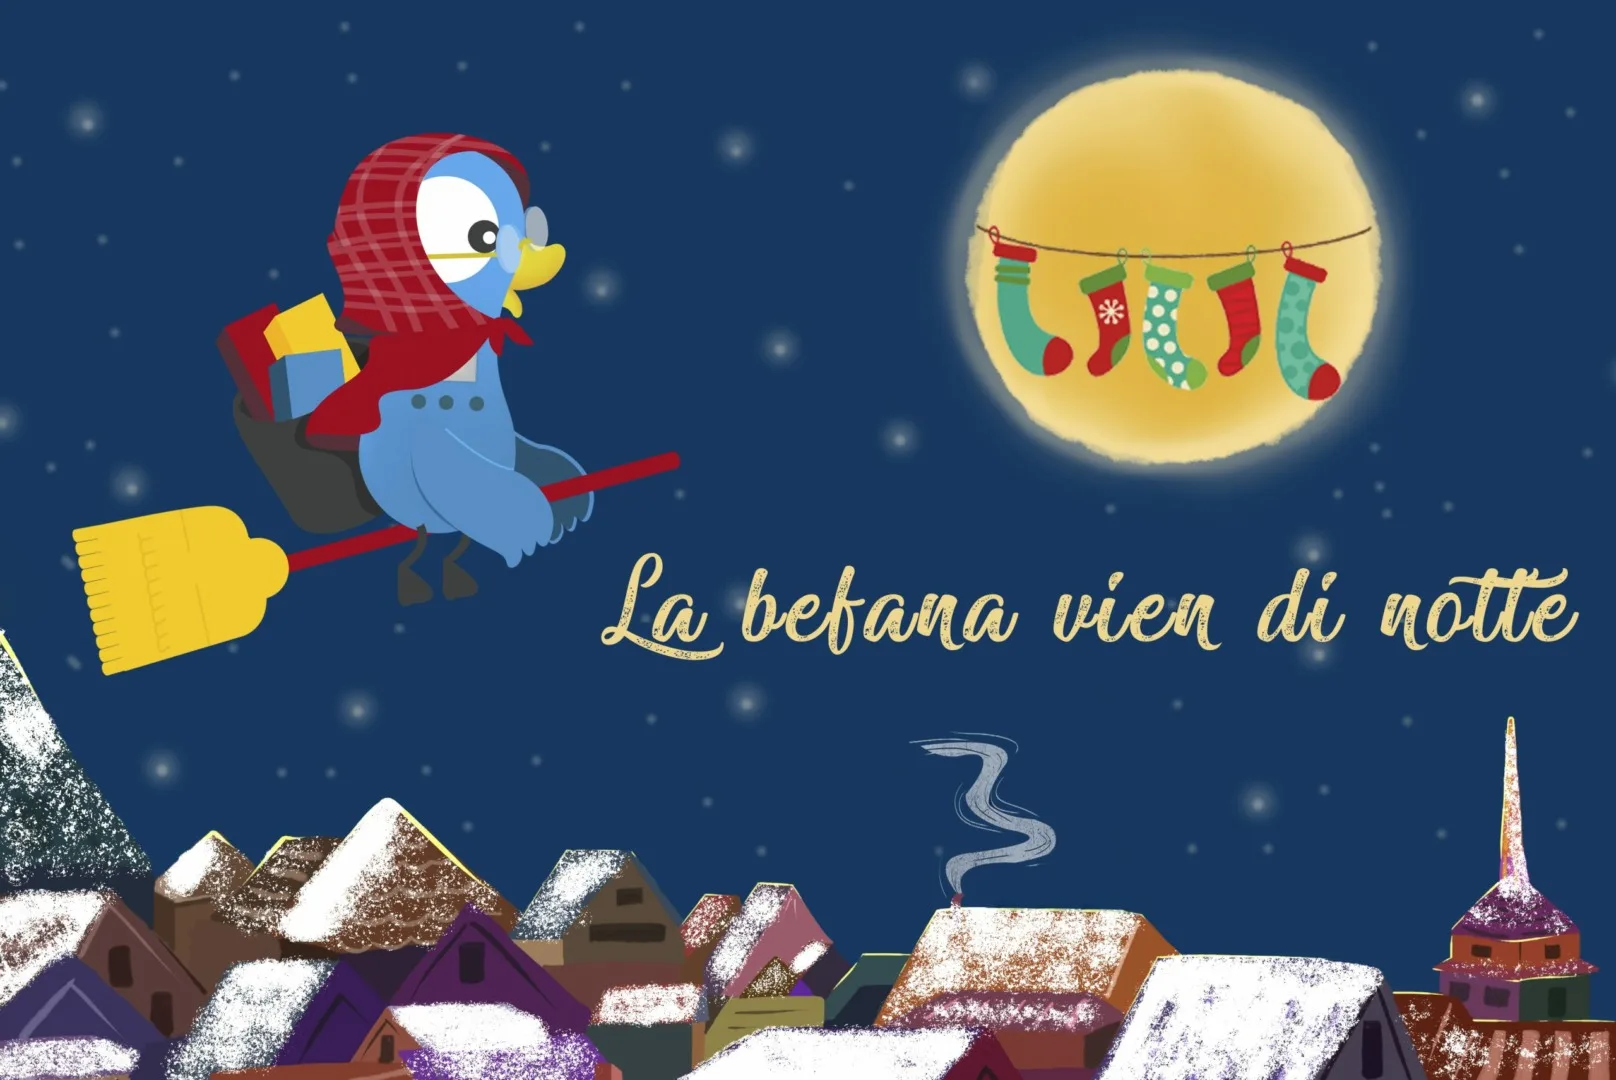 The Befana comes at night: history, origins and celebrations of the Epiphany